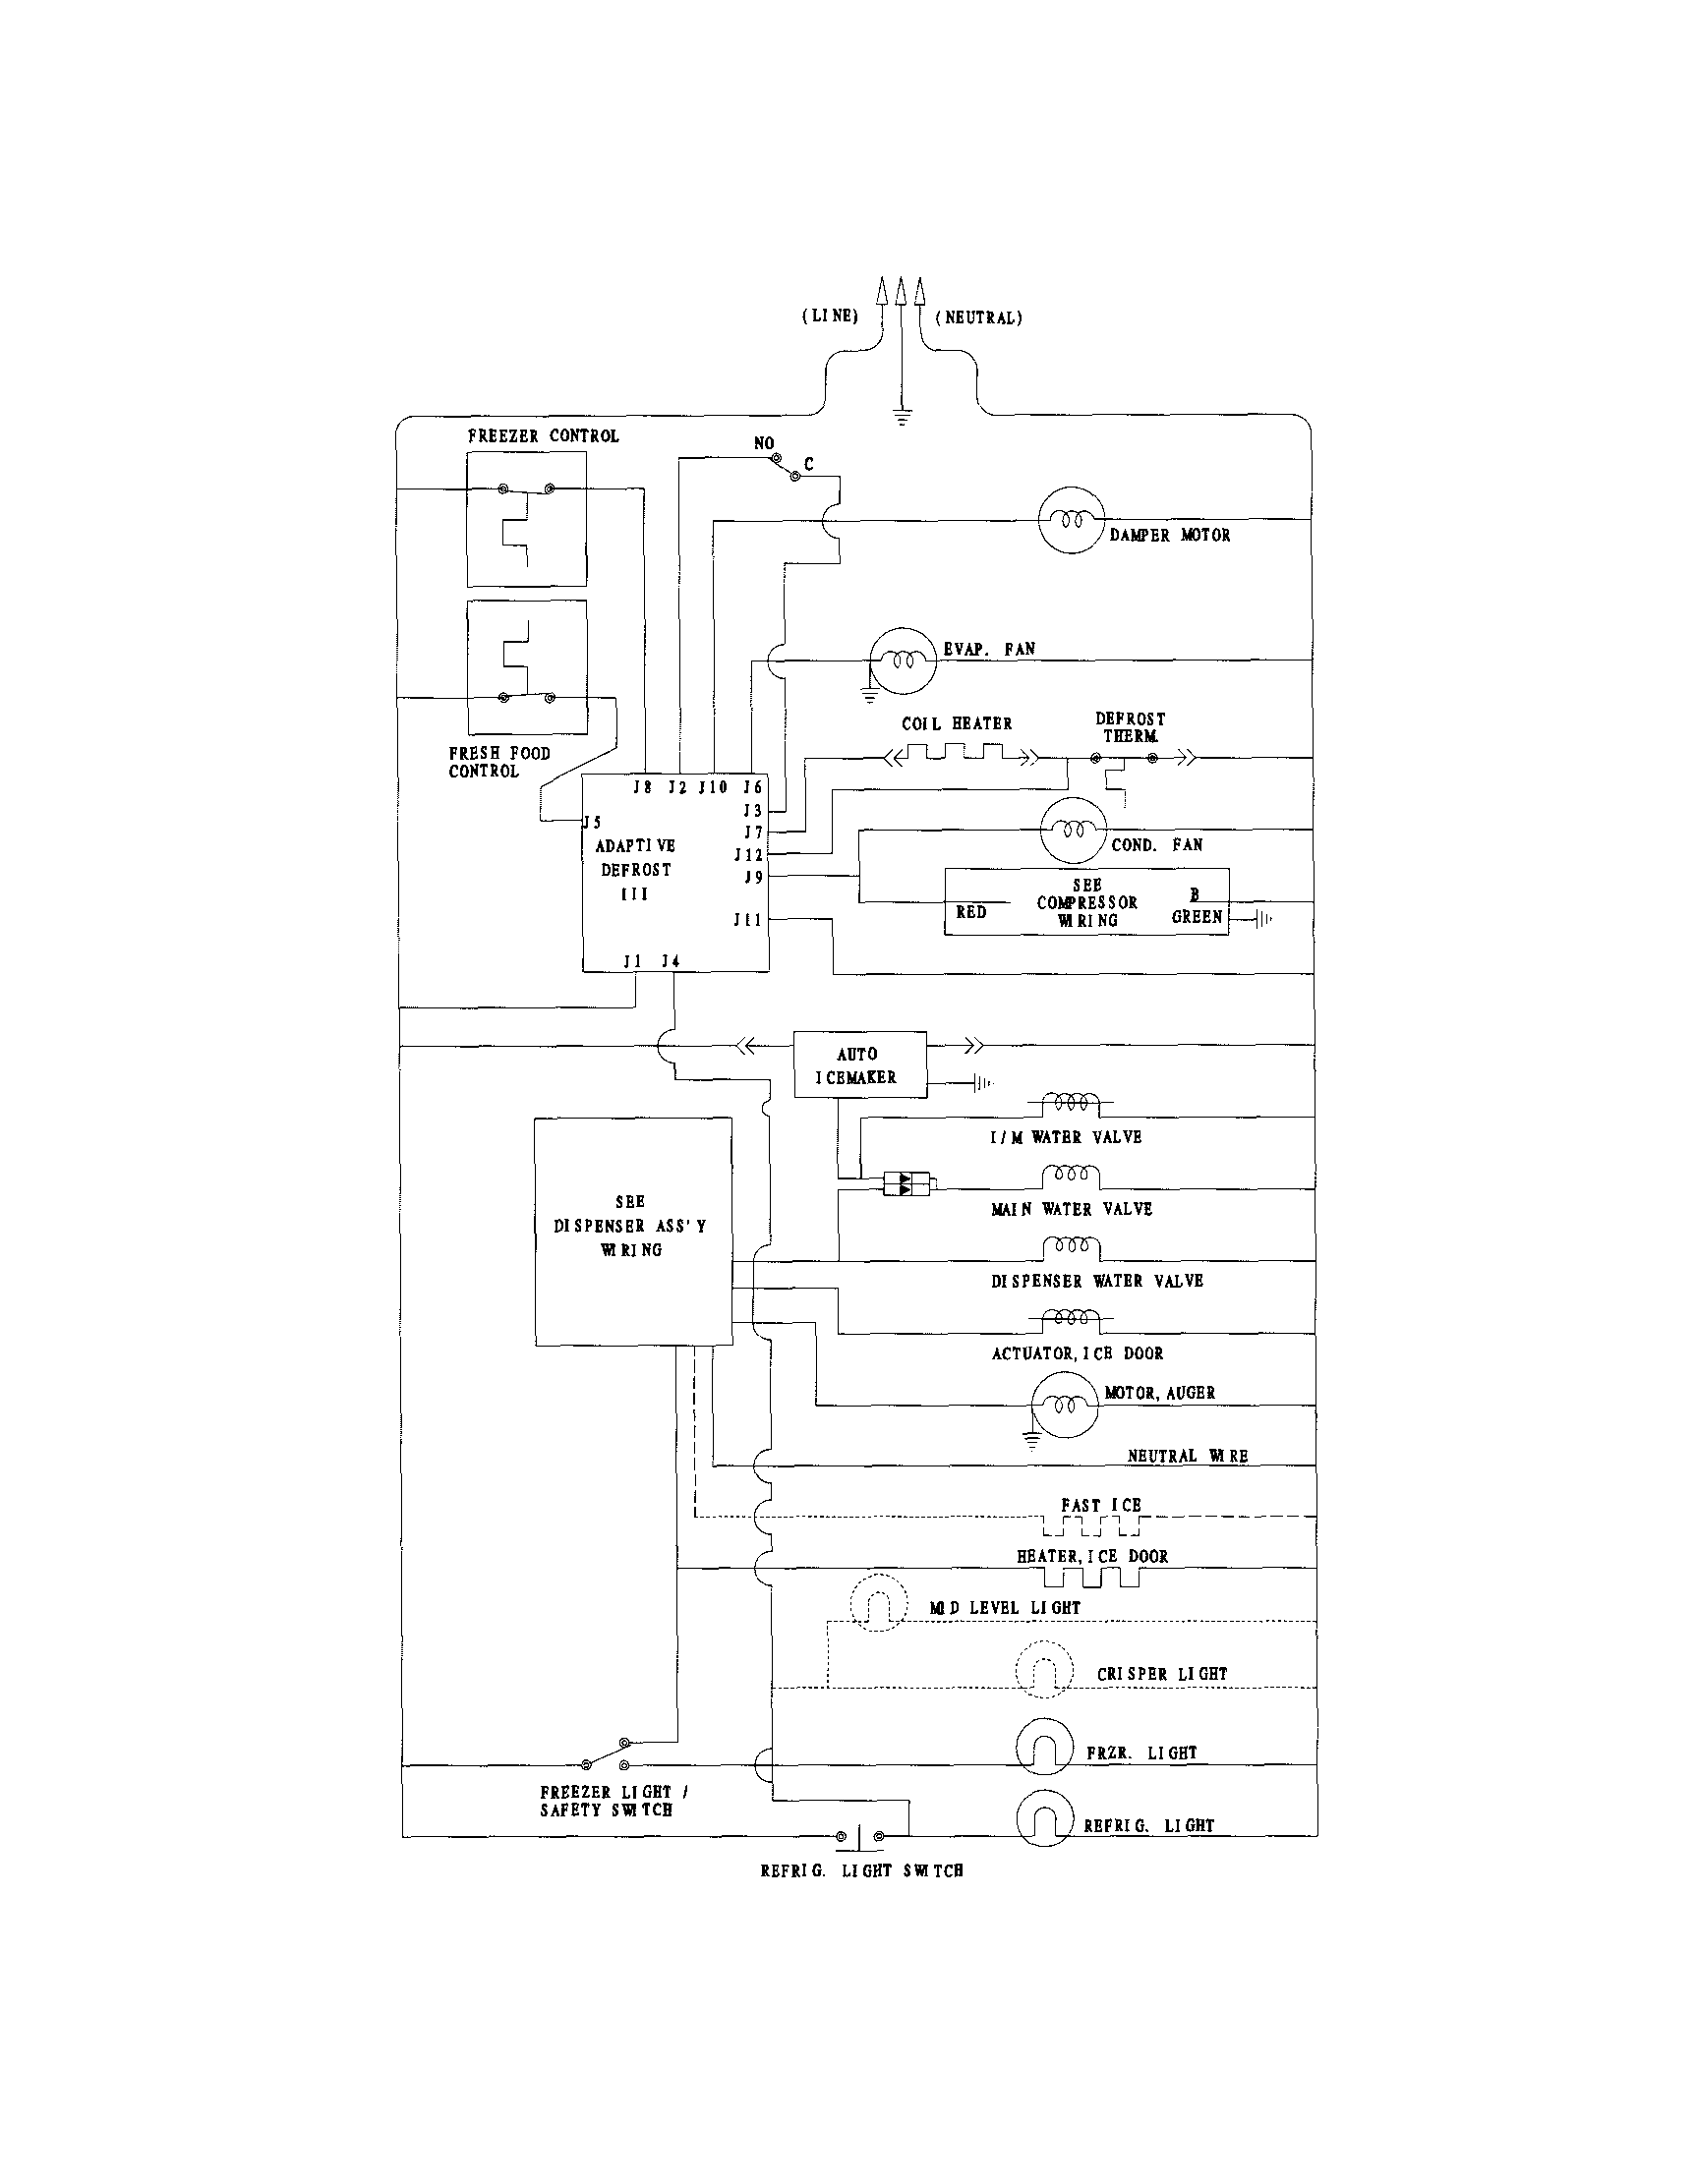 Wiring Diagram For A Frigidaire Dryer from c.searspartsdirect.com